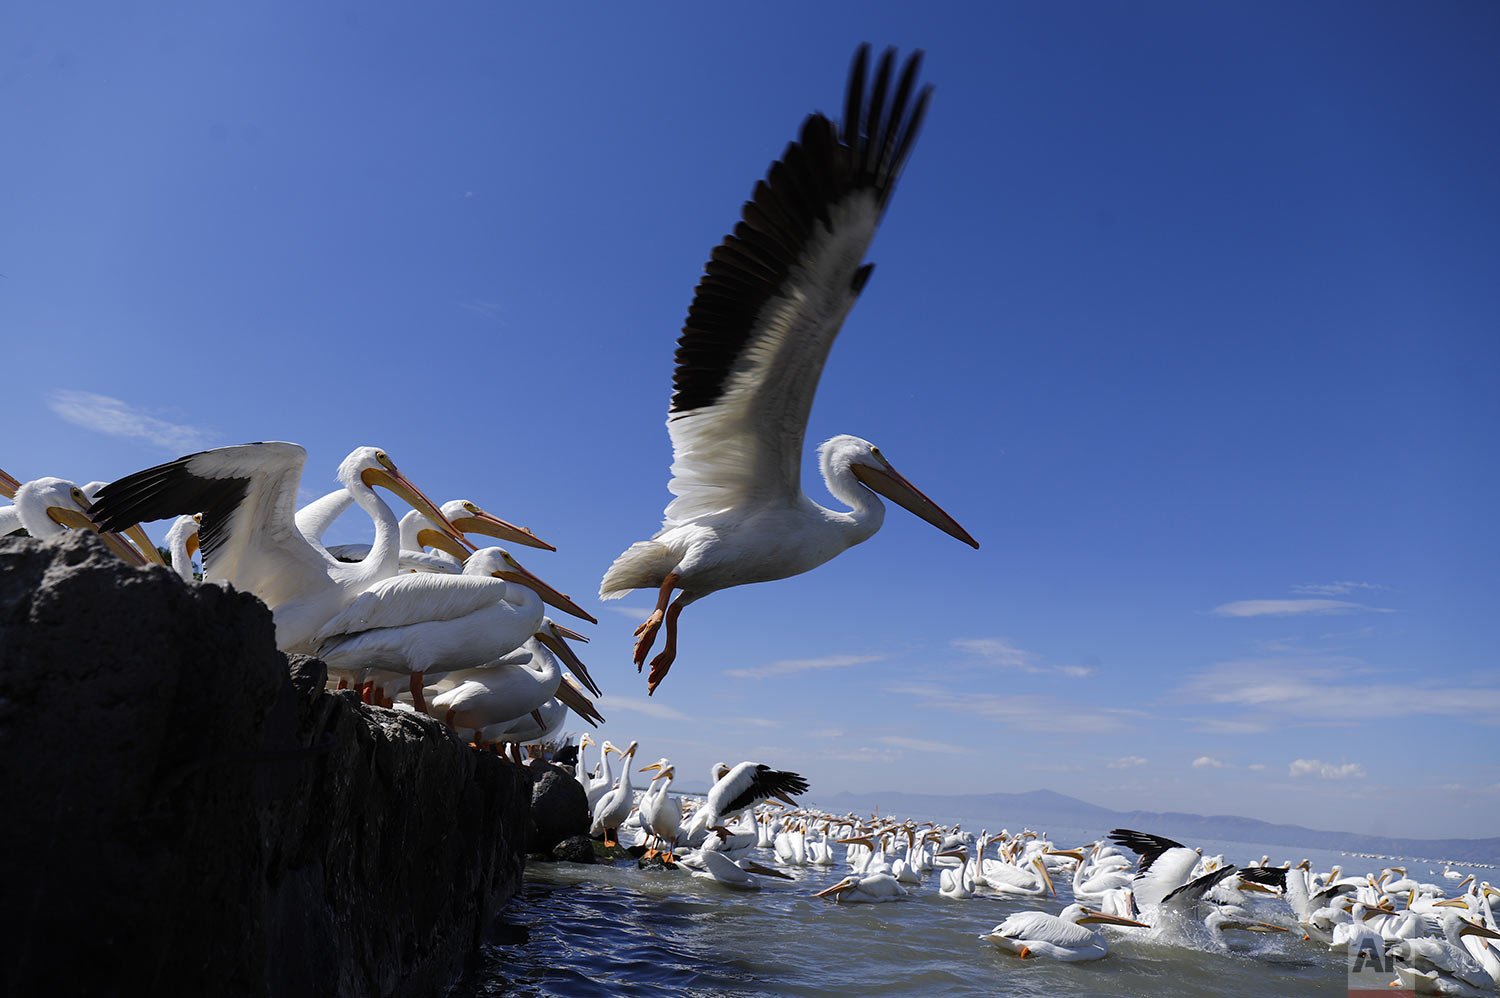  A white pelican takes flight on Lake Chapala in Petatan, Mexico, Feb. 5, 2022. The pelicanos borregones come to Mexico every year to escape the bitter cold of the north, flying from Canada and the U.S. to the warmer climate in Michoacan state. (AP P